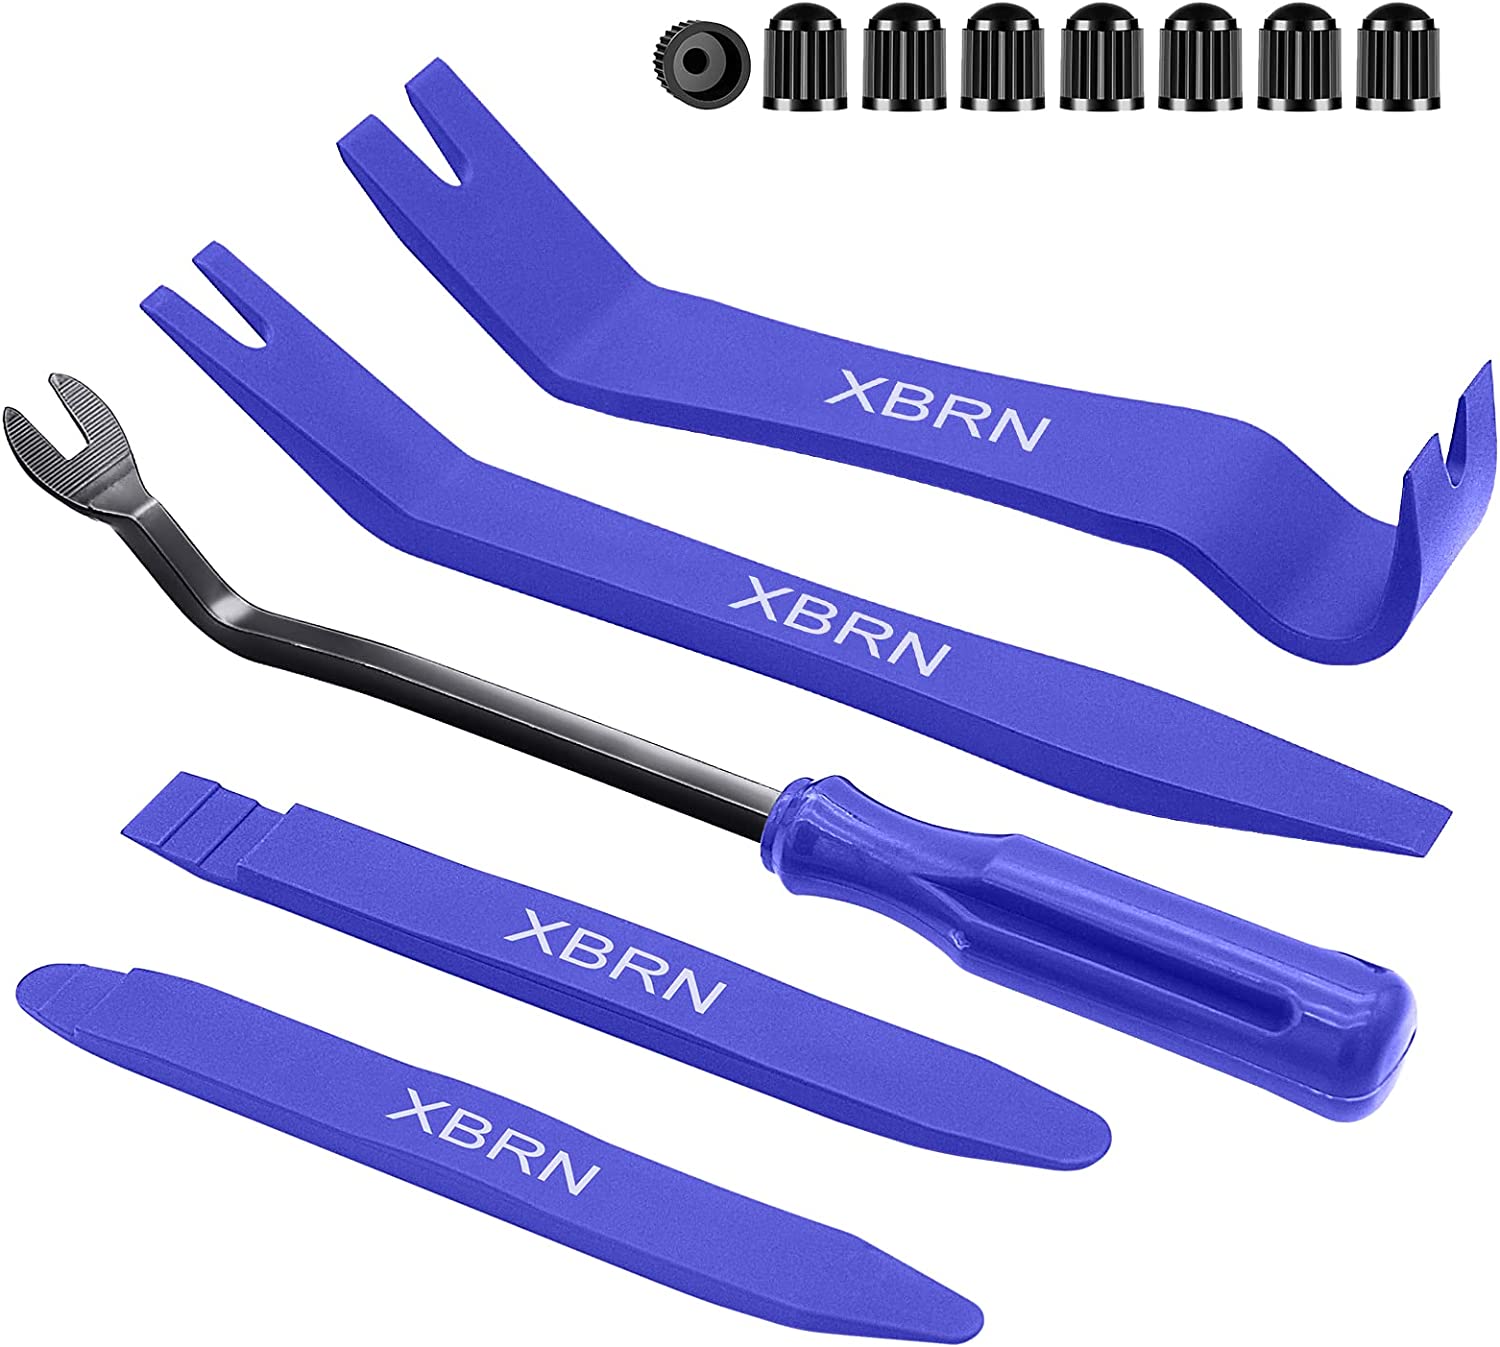 Panel Removal Tool 11 PCS with Bag- Premium Auto Trim Upholstery Removal Kit  - China Panel Removal Tool, Auto Trim